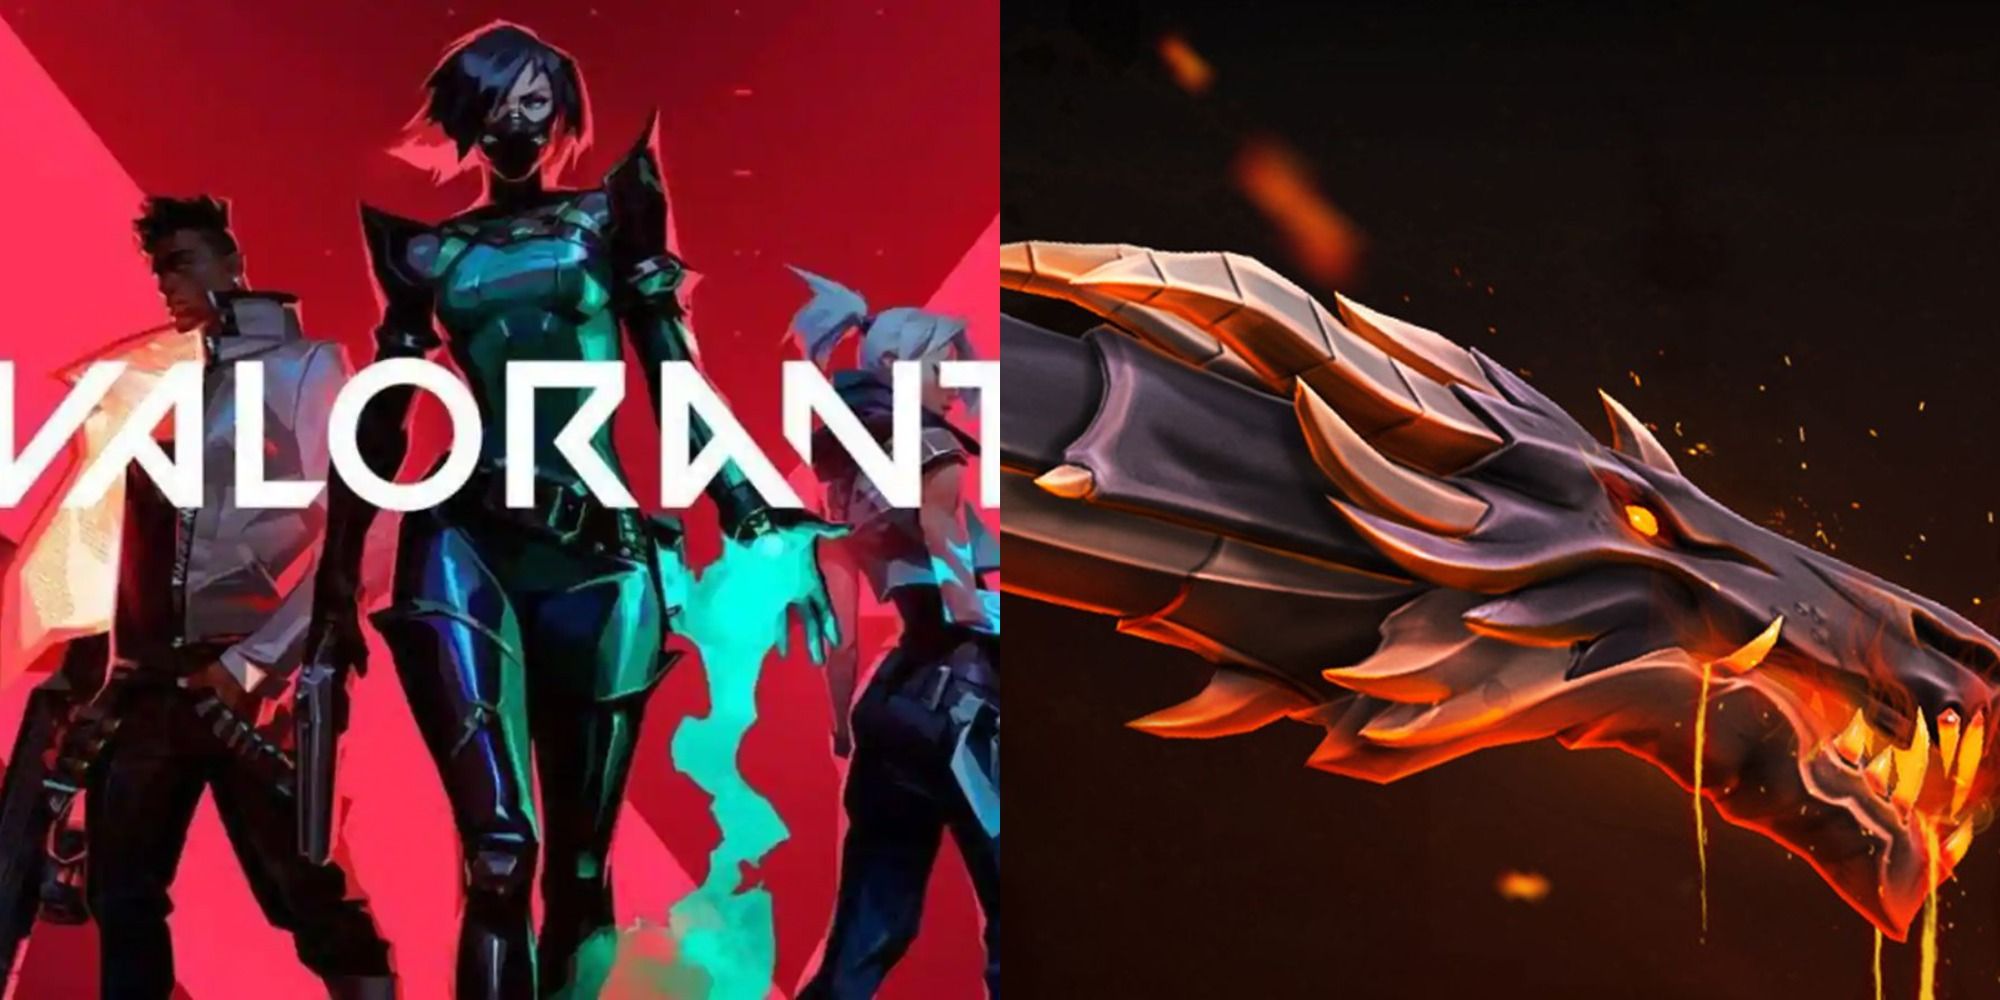 Split image showing the cover for Vaalorant and the Elderflame skin